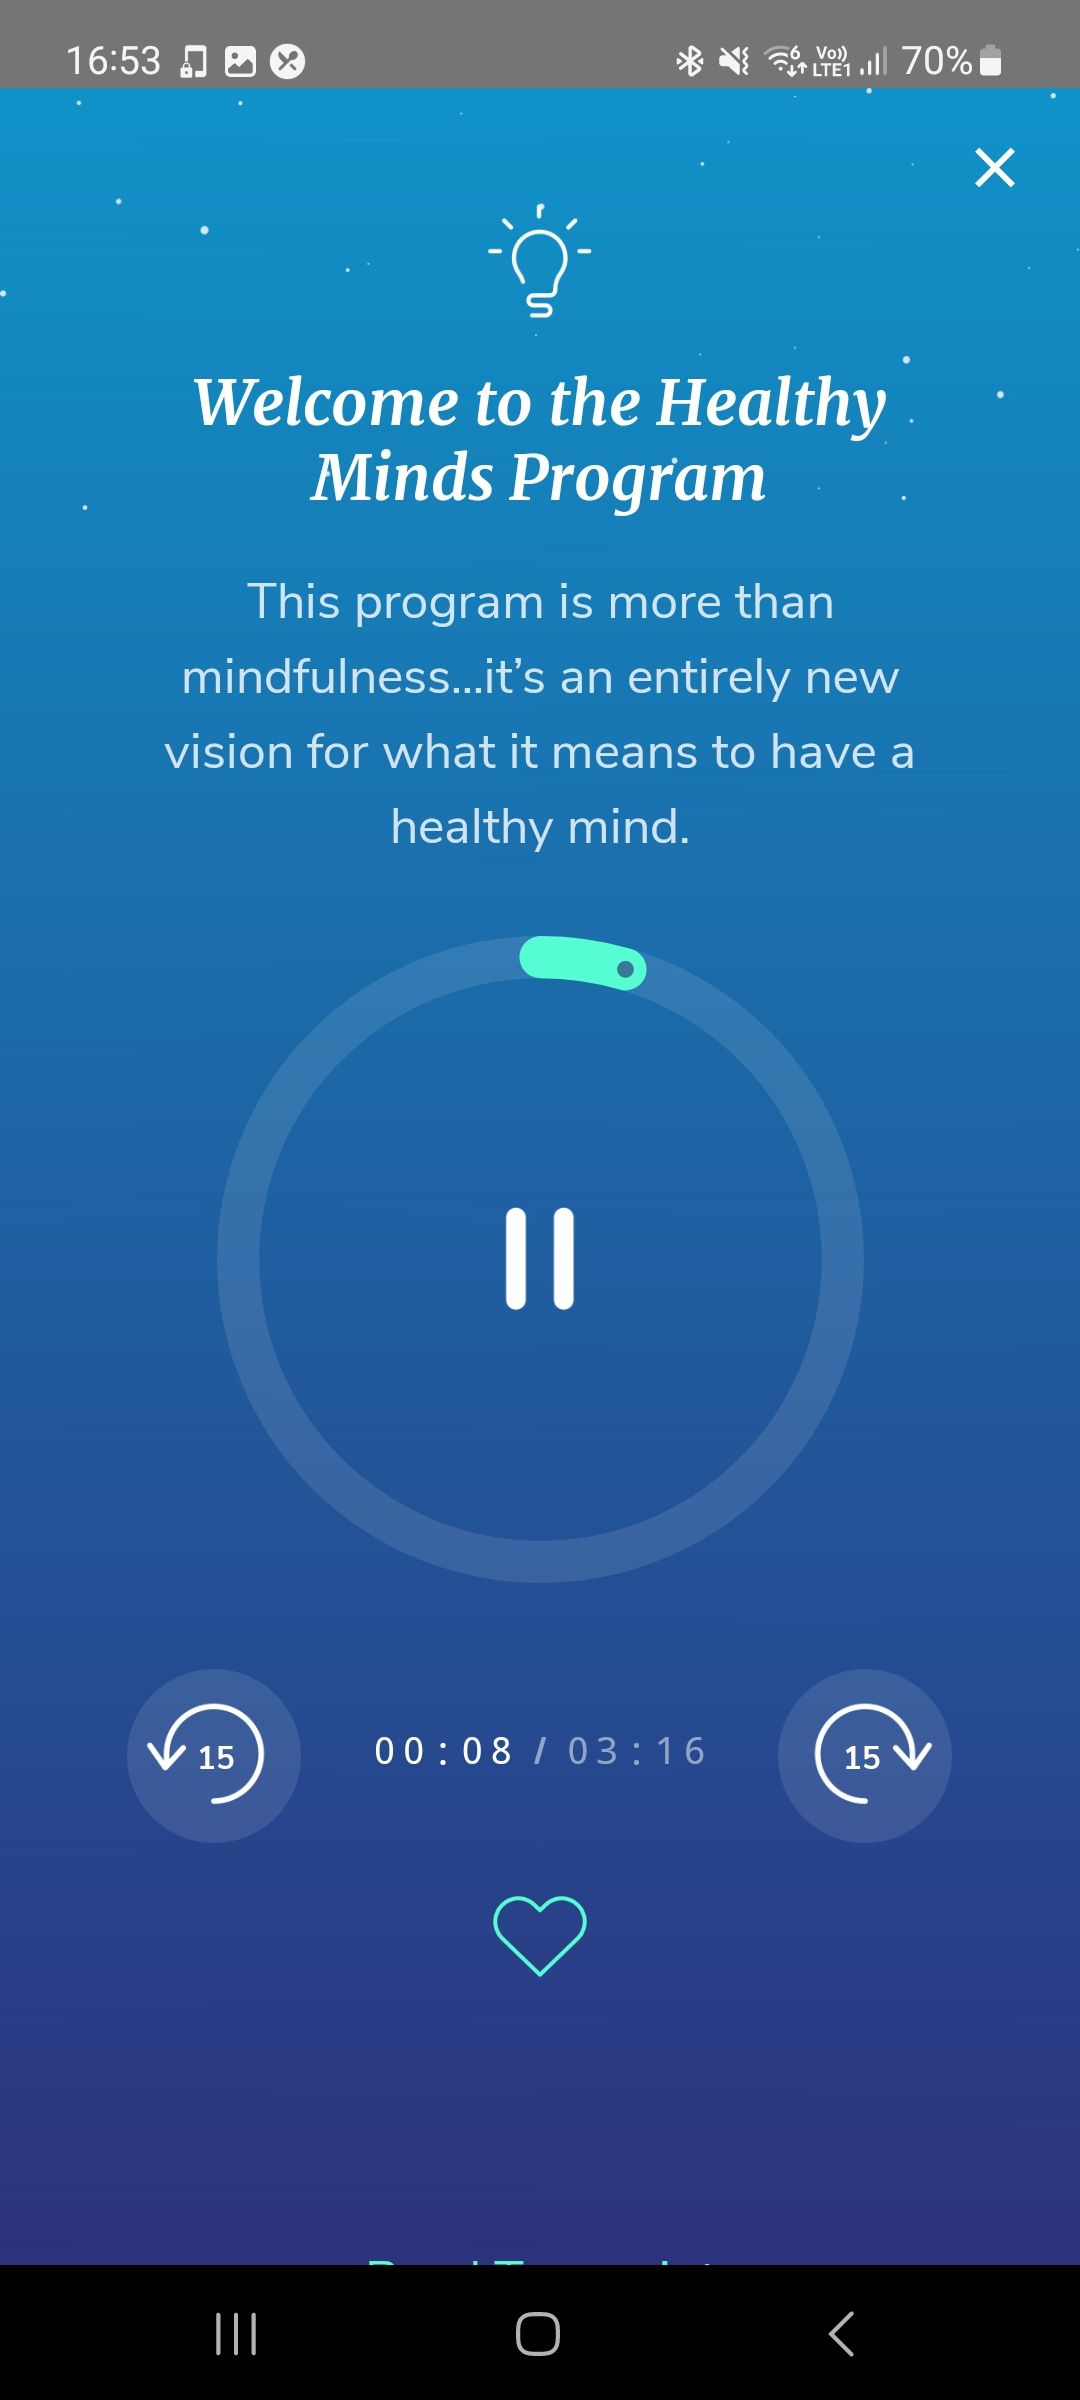 Introductory audio track in Healthy Minds Program app